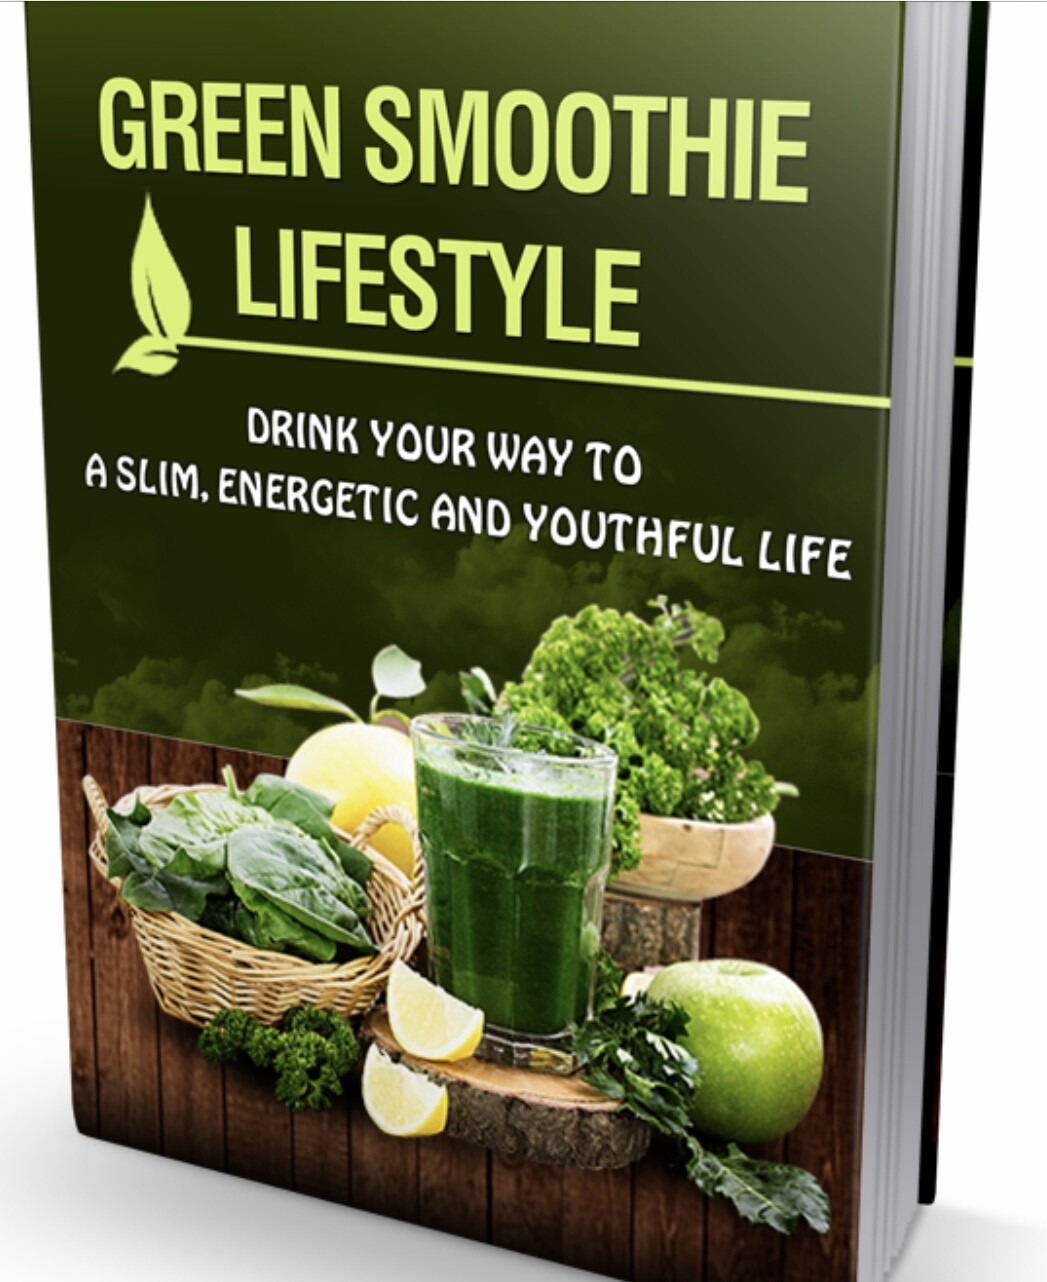 3 ebooks, Green Smoothie Lifestyle, Green Smoothies, and 10 Ways to Fight off Cancer